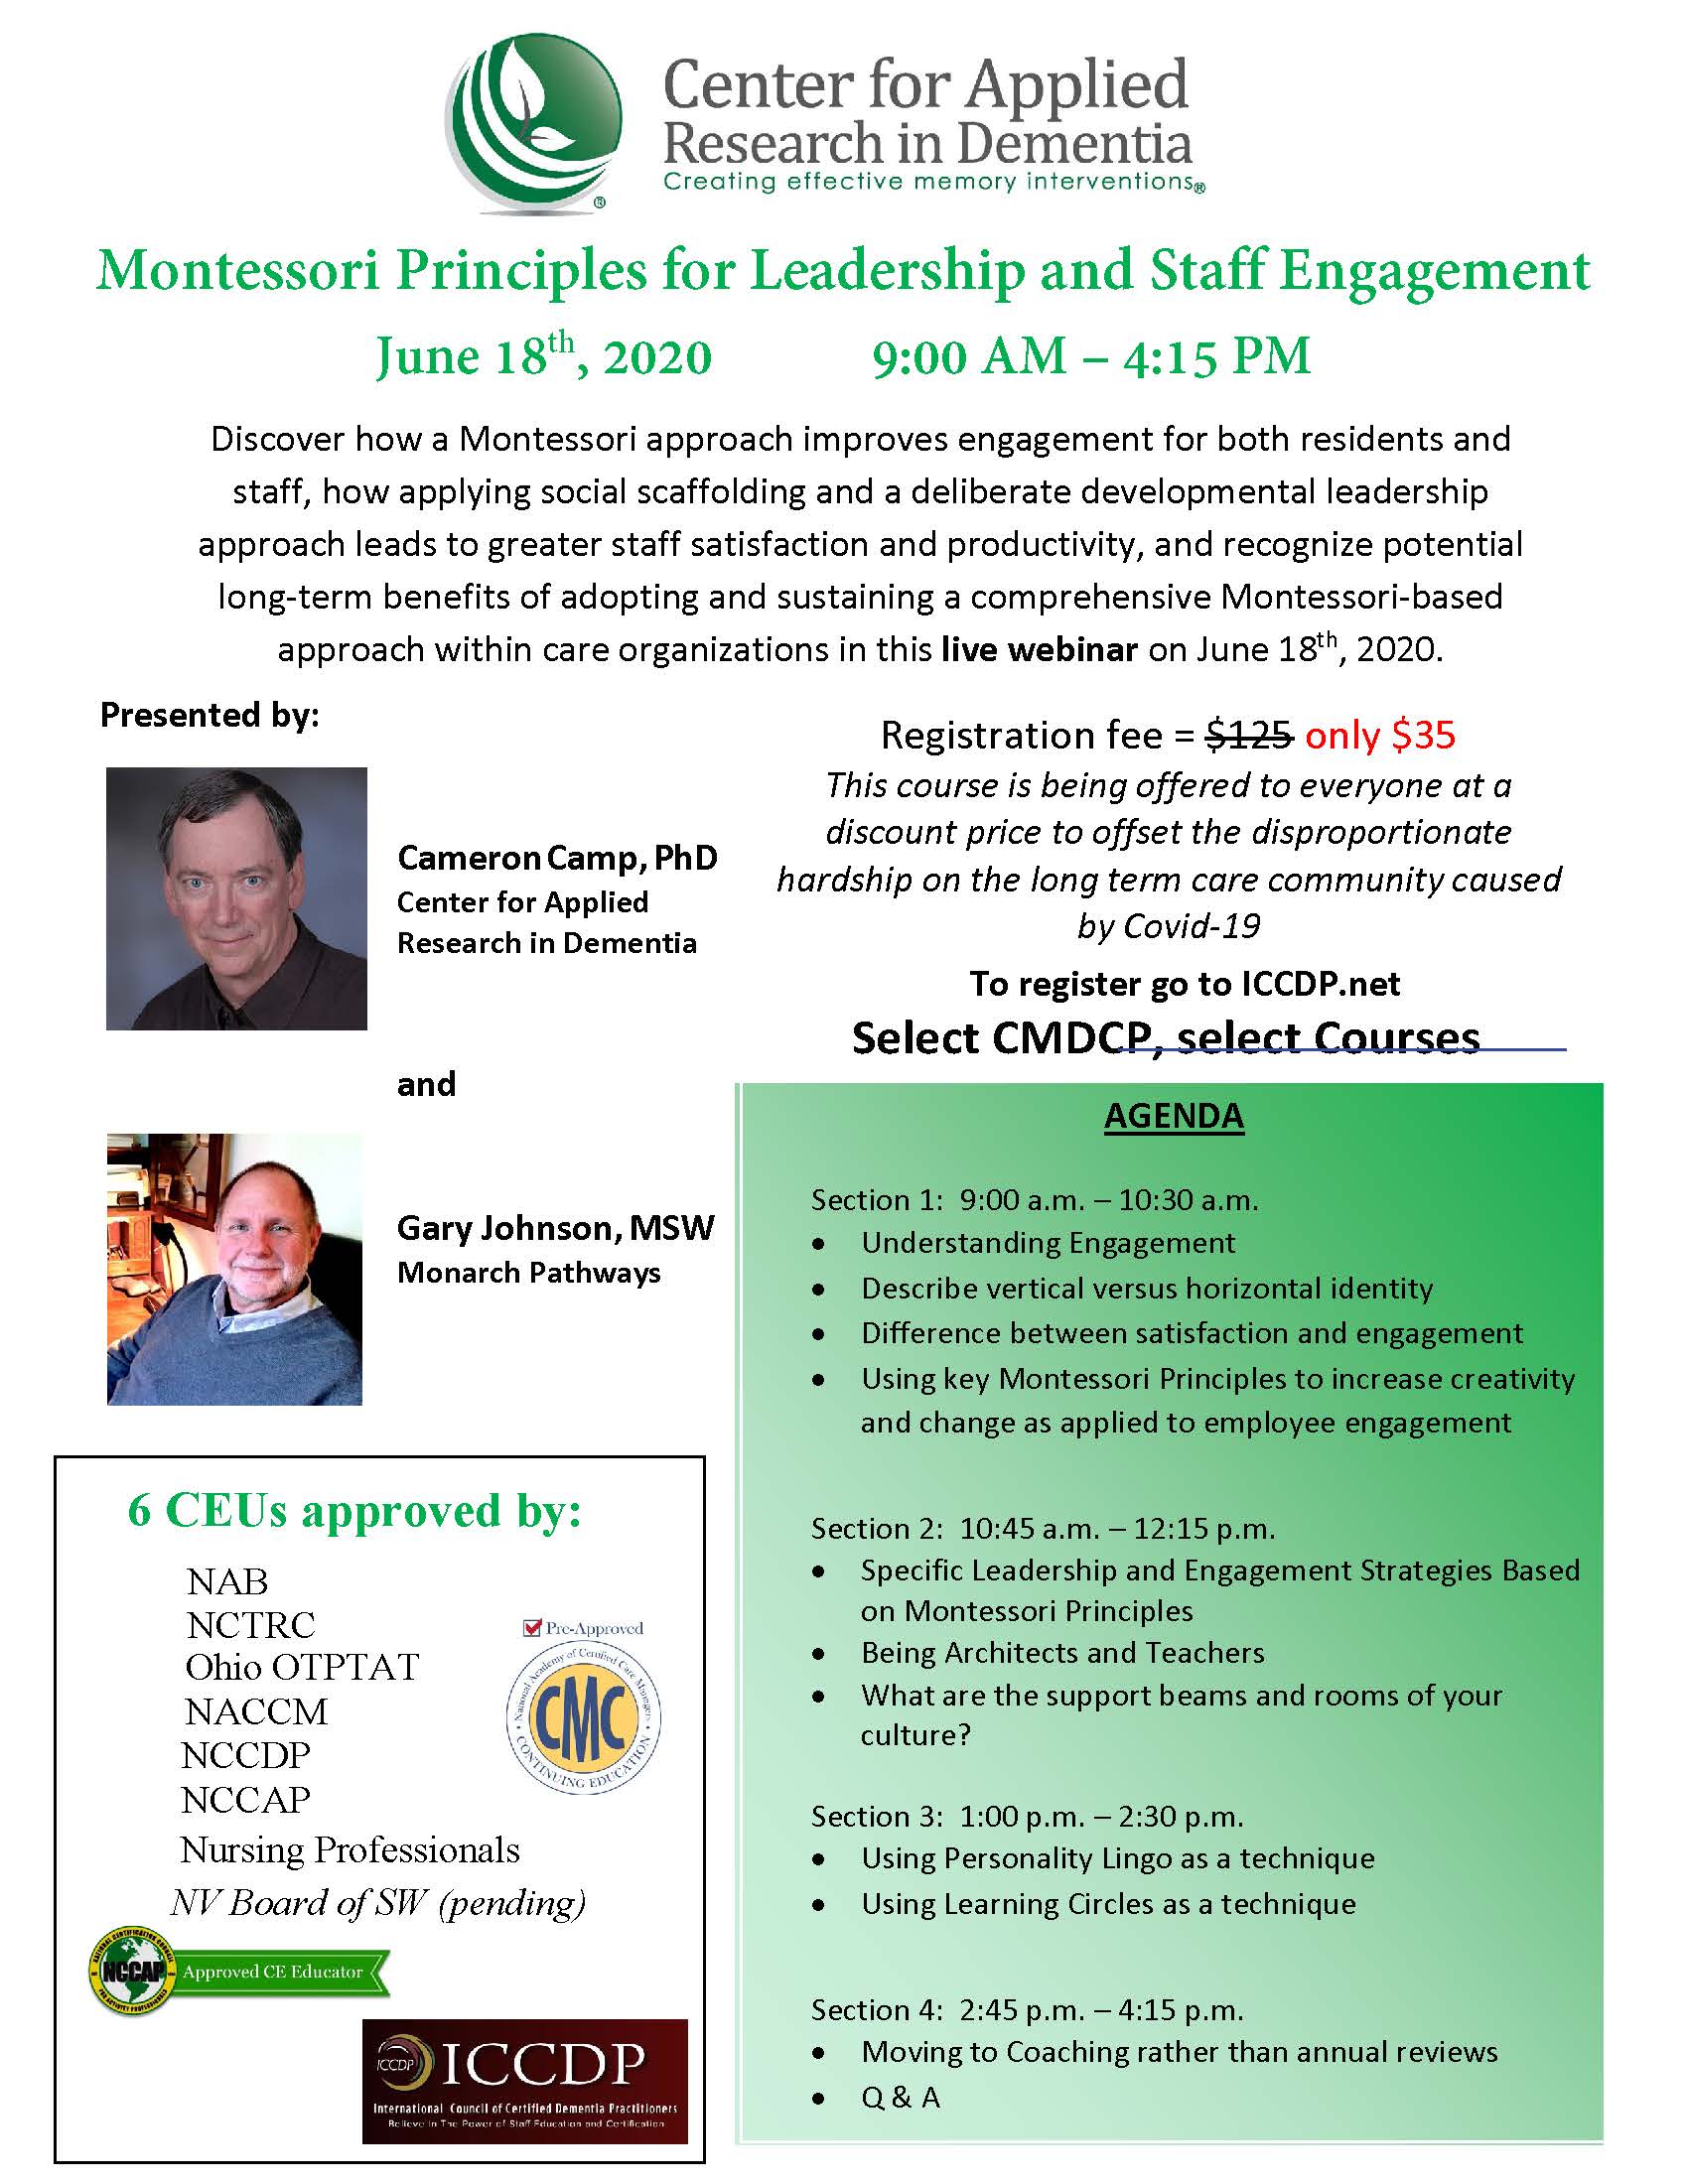 Montessori Principles for Leadership and Staff Engagement flyer.